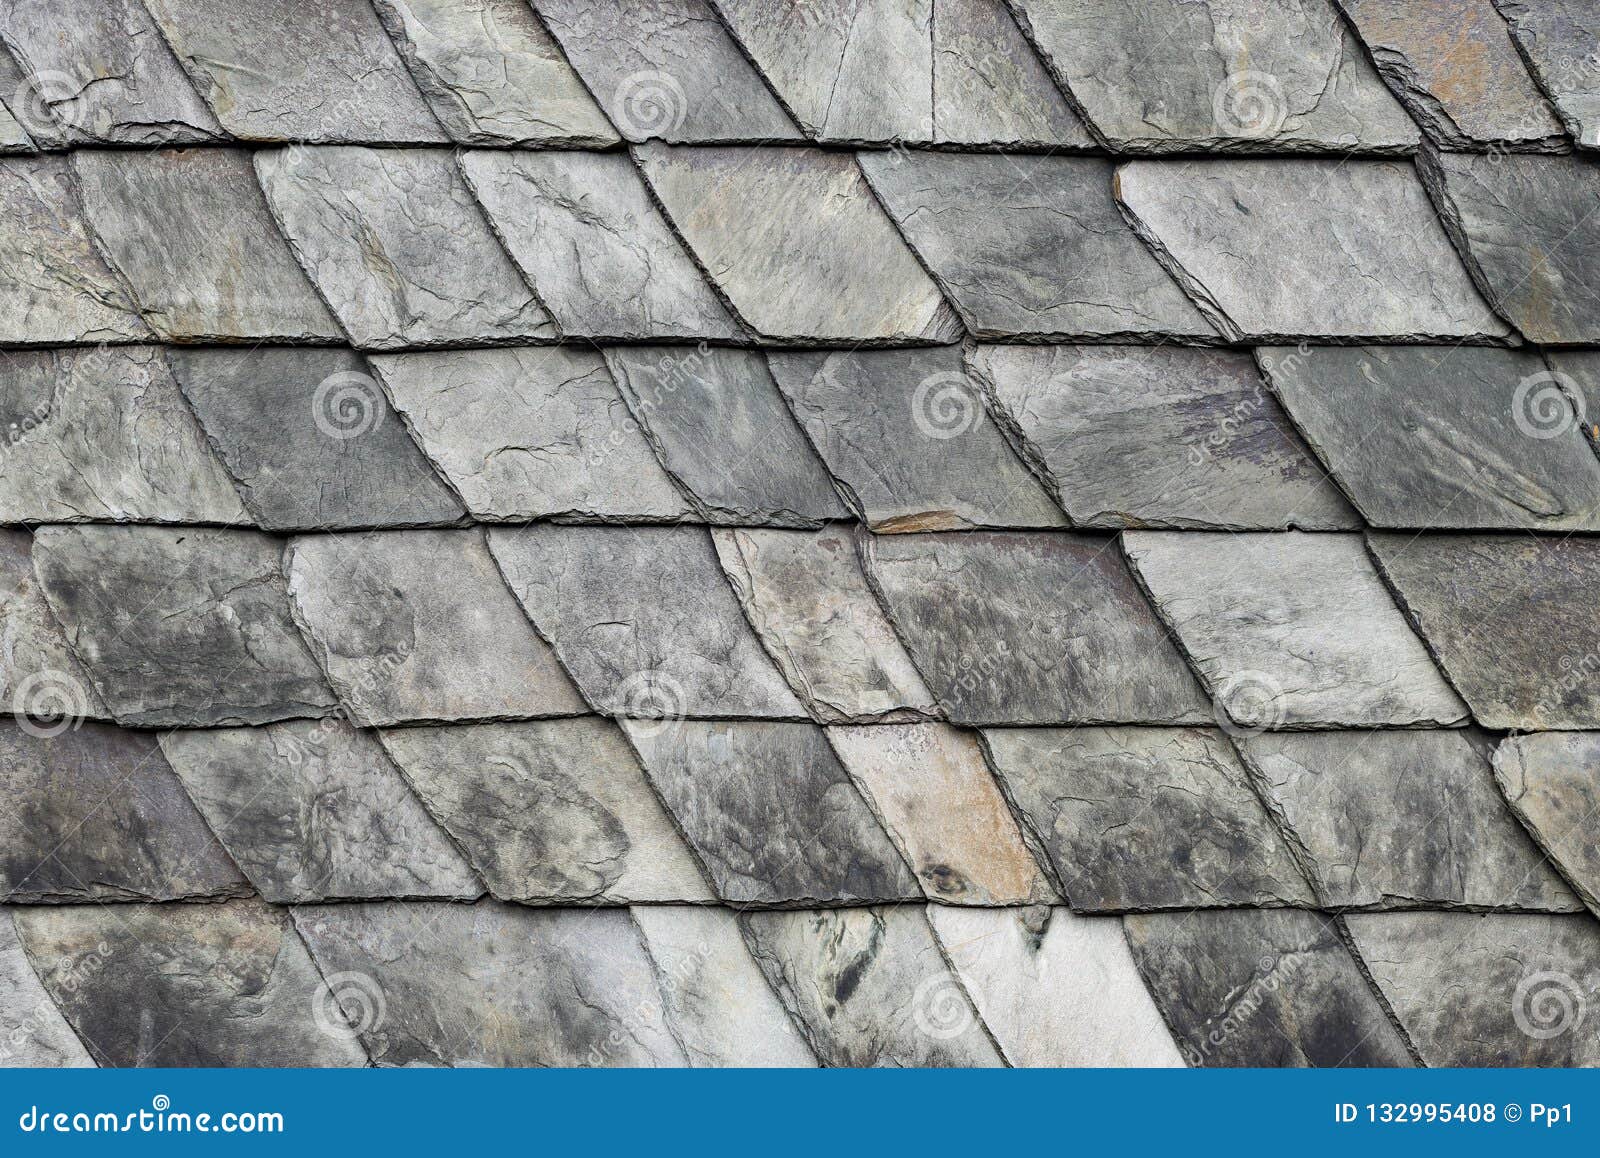 Slate Roof Roofing Tiles Square Stone Texture Stock Photo - Image of